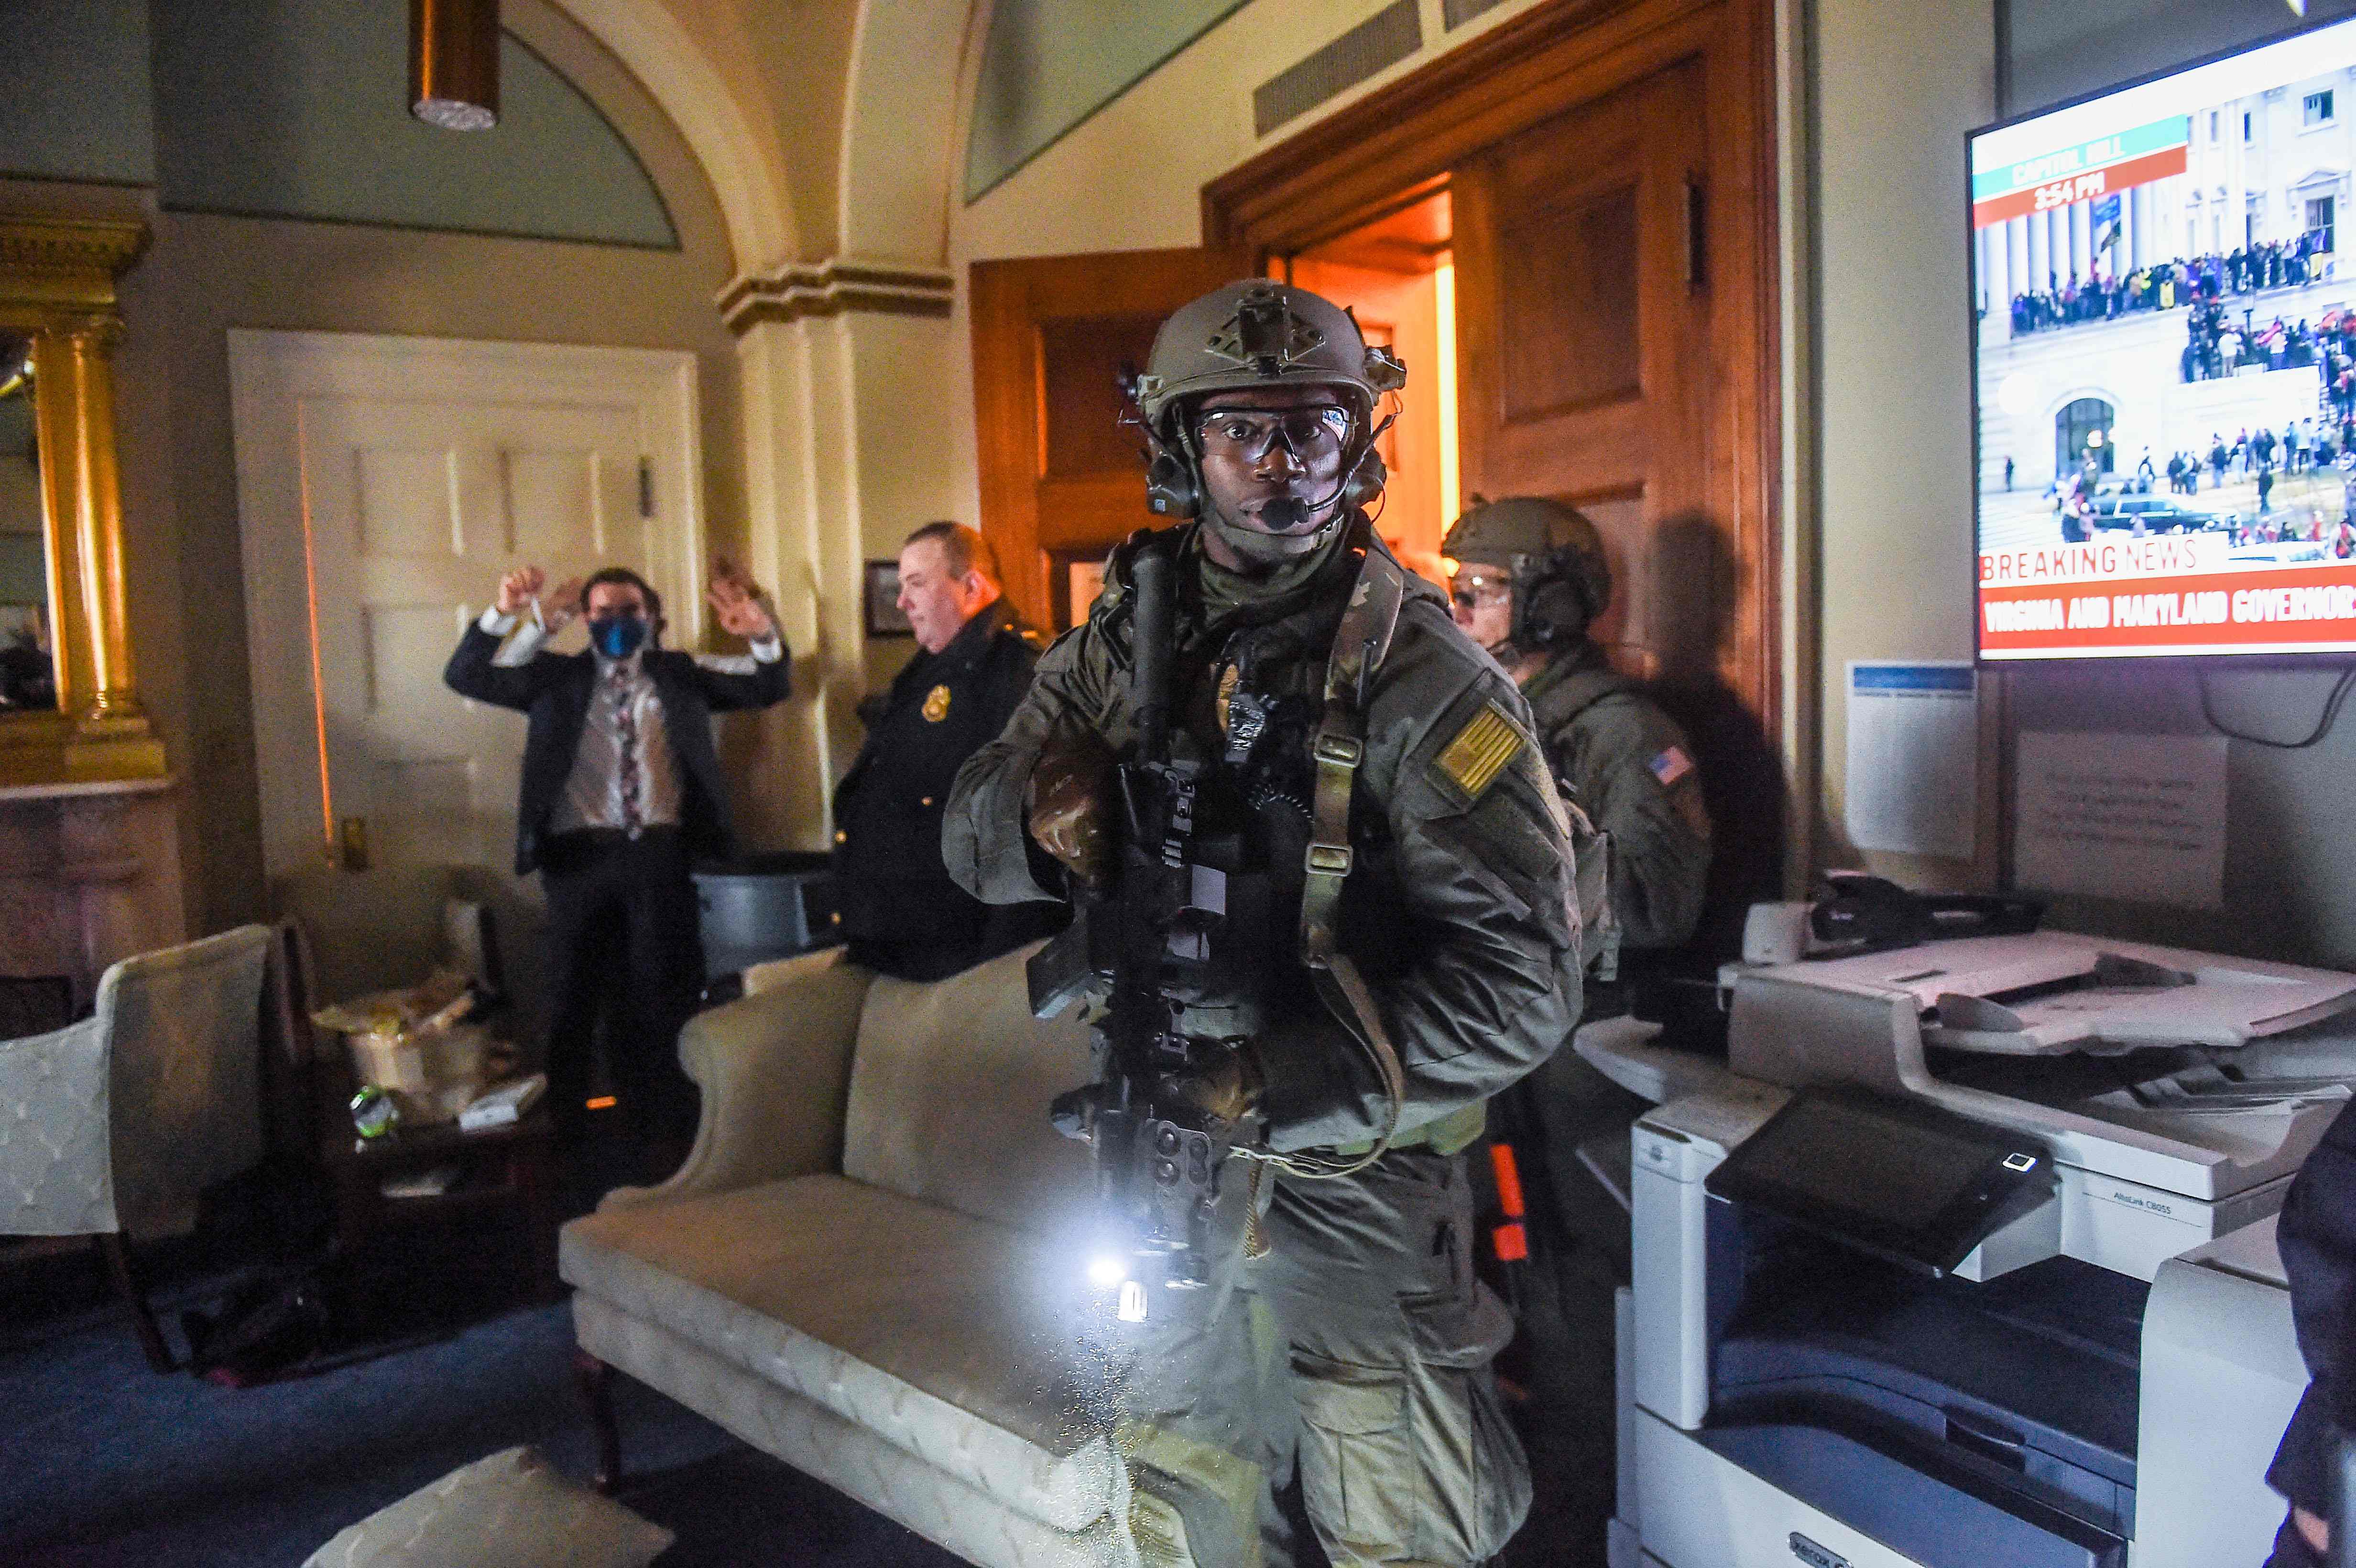 A congressional staffer holds his hands up while the Capitol Police Swat team checks everyone in the room as they secure the floor from supporters of then-President Donald Trump in Washington, D.C., on Jan. 6, 2021.